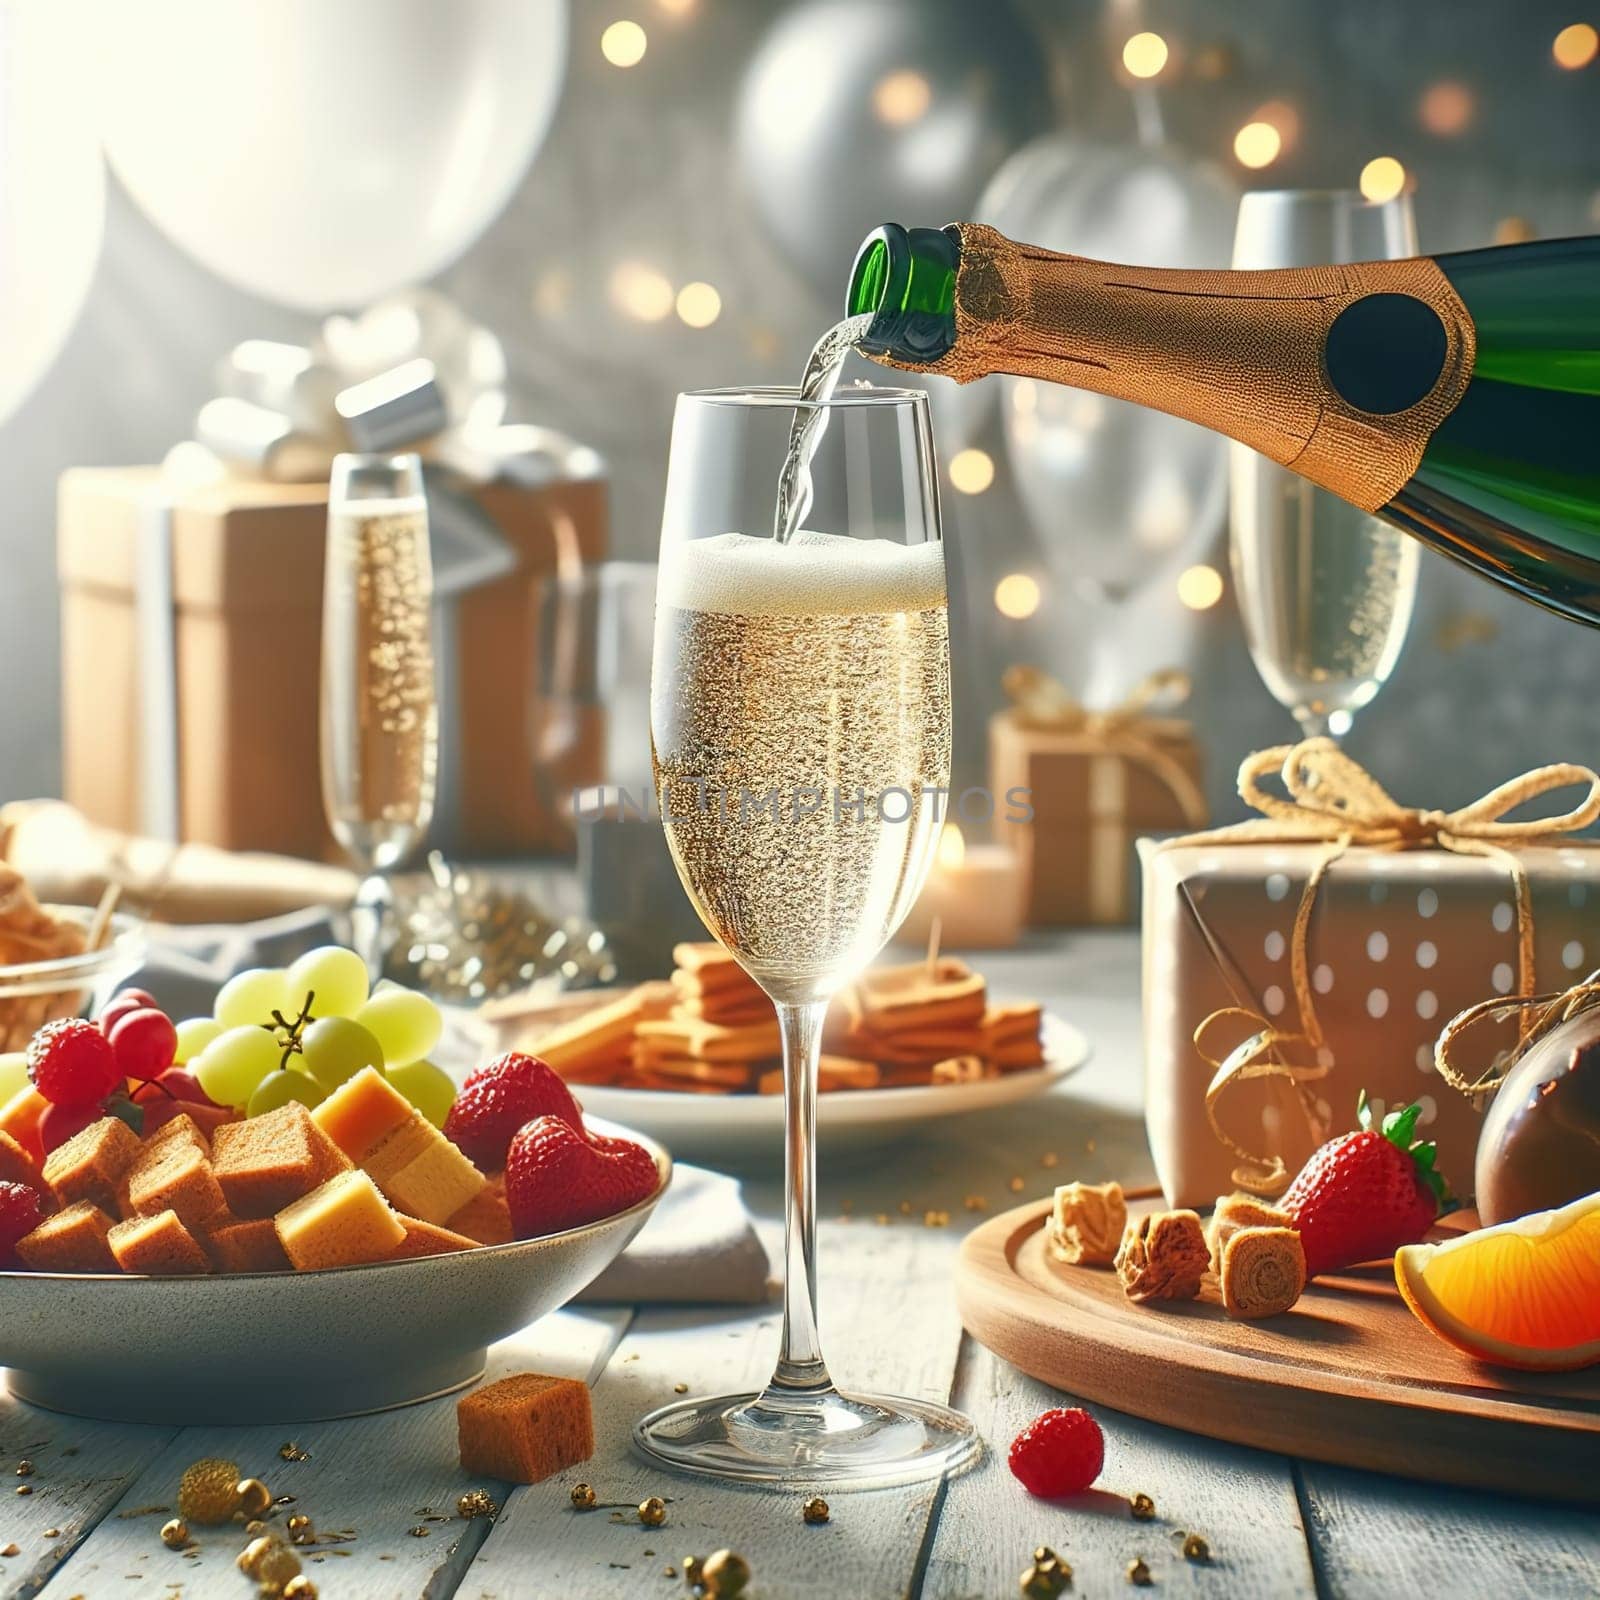 Gifts, light snacks and fruits on the holiday table. Sparkling wine is poured into a glass